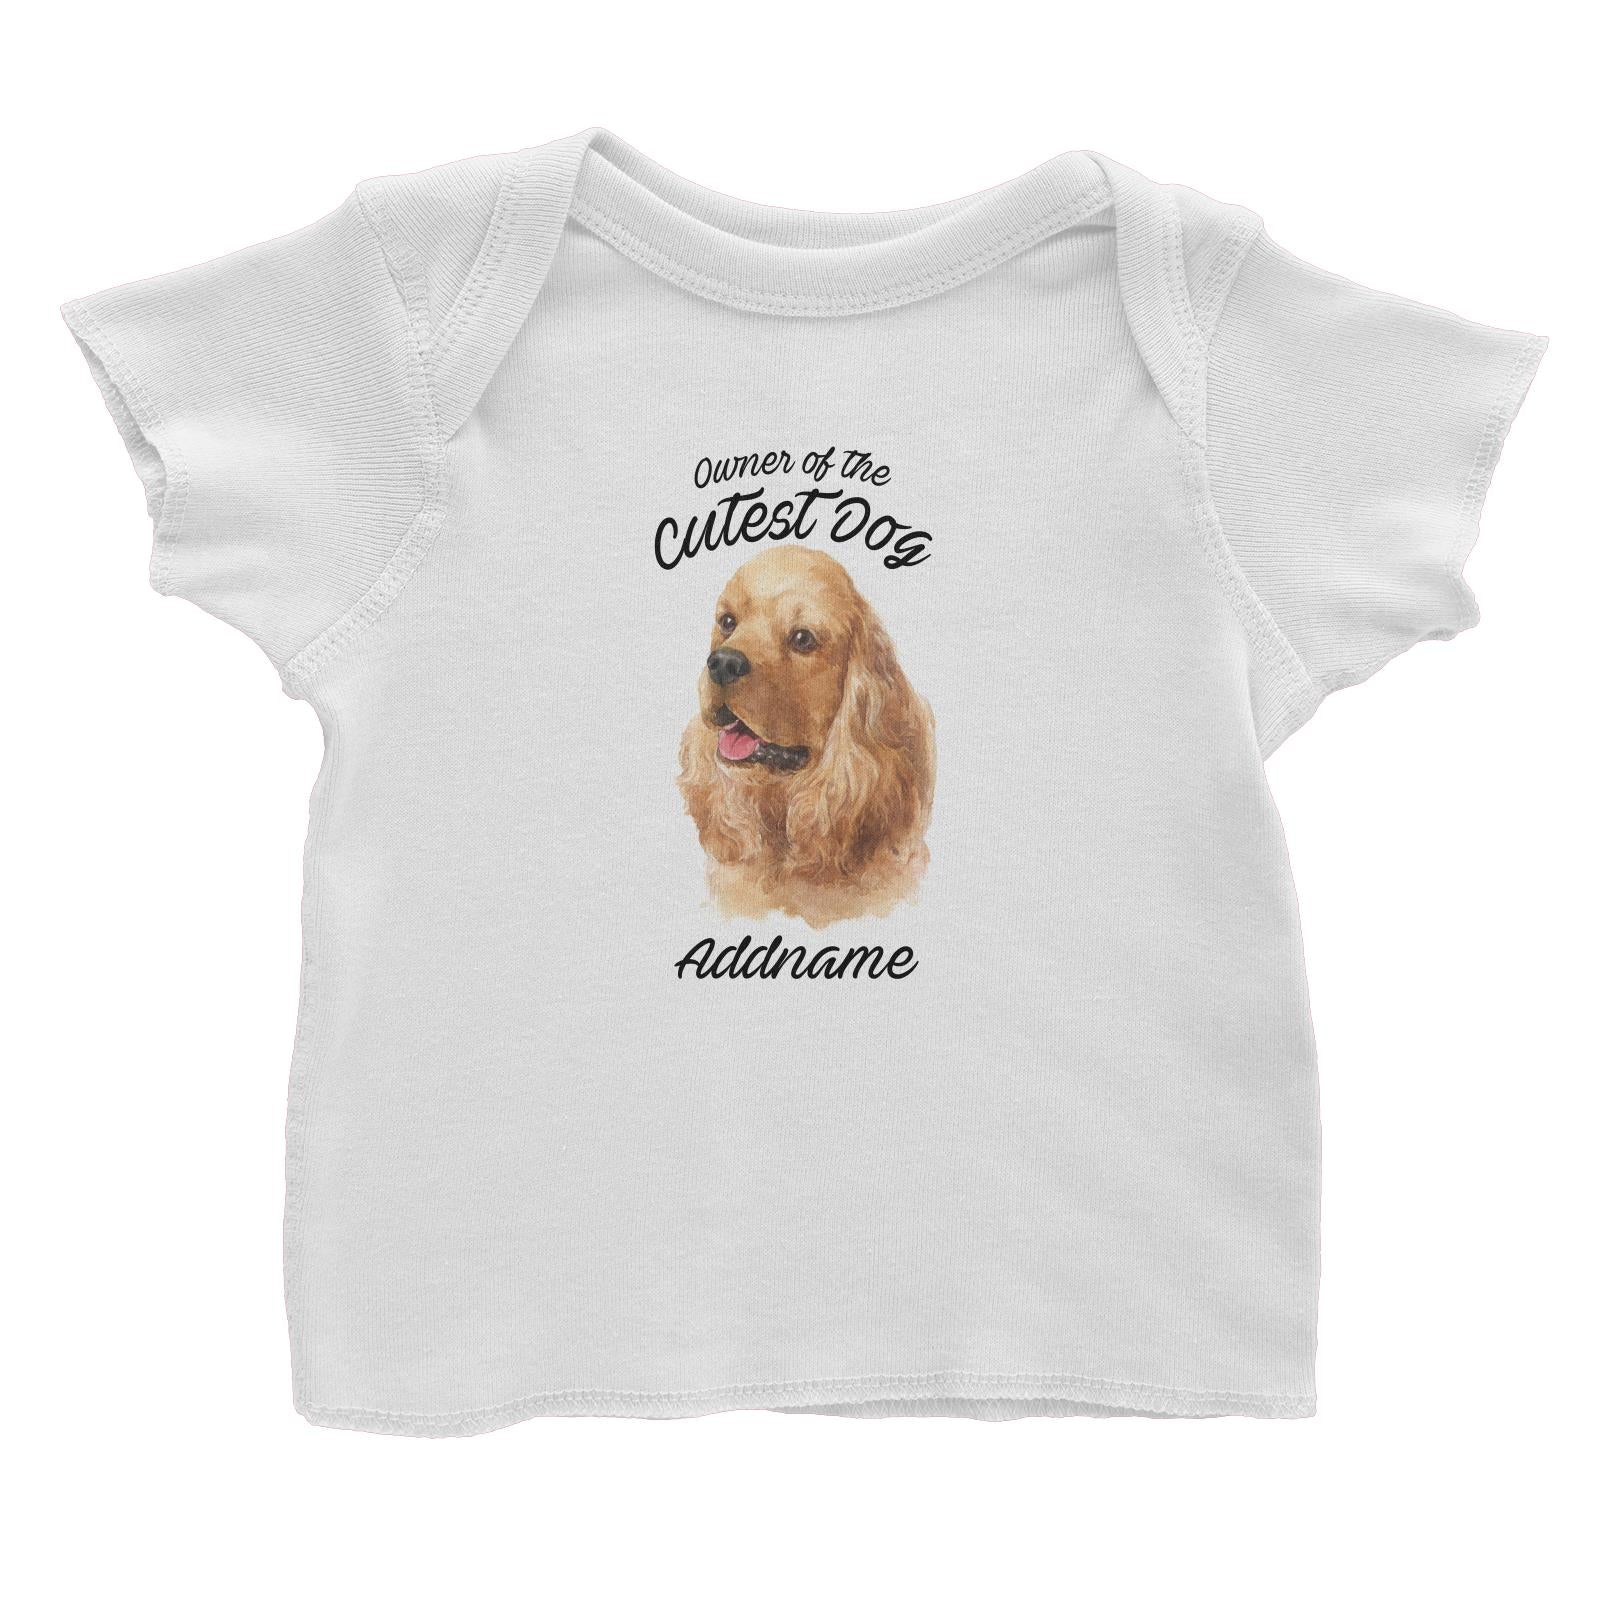 Watercolor Dog Owner Of The Cutest Dog Cocker Spaniel Addname Baby T-Shirt